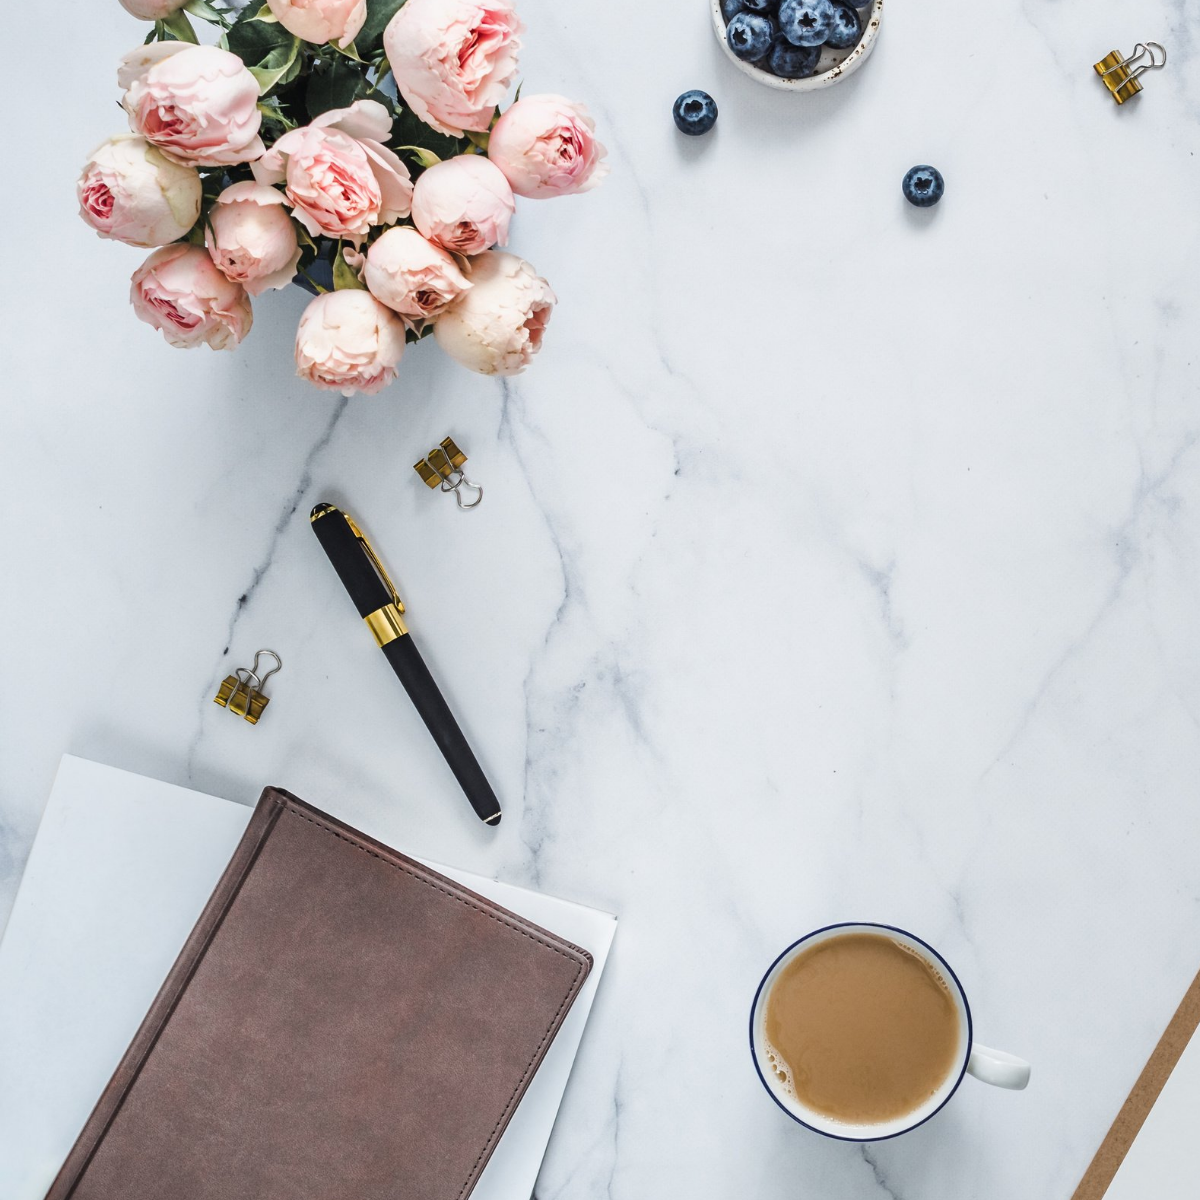 cup of coffee next to a lined notebook and pen…and light pink roses in a vase